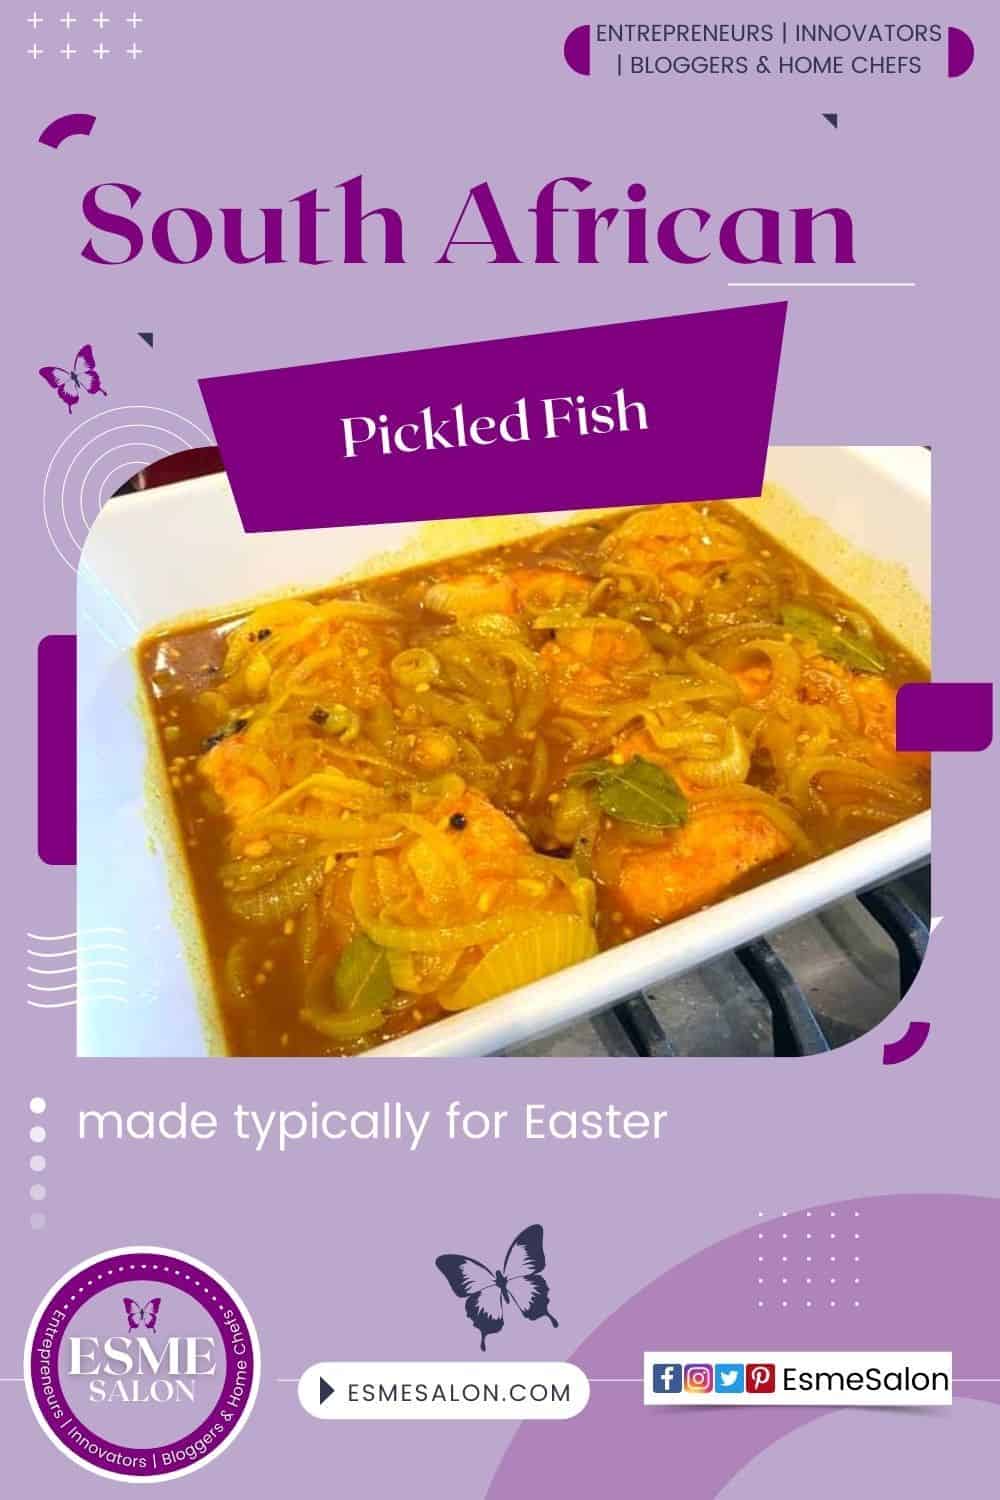 South African Style Pickled Fish with onions and curry sauce